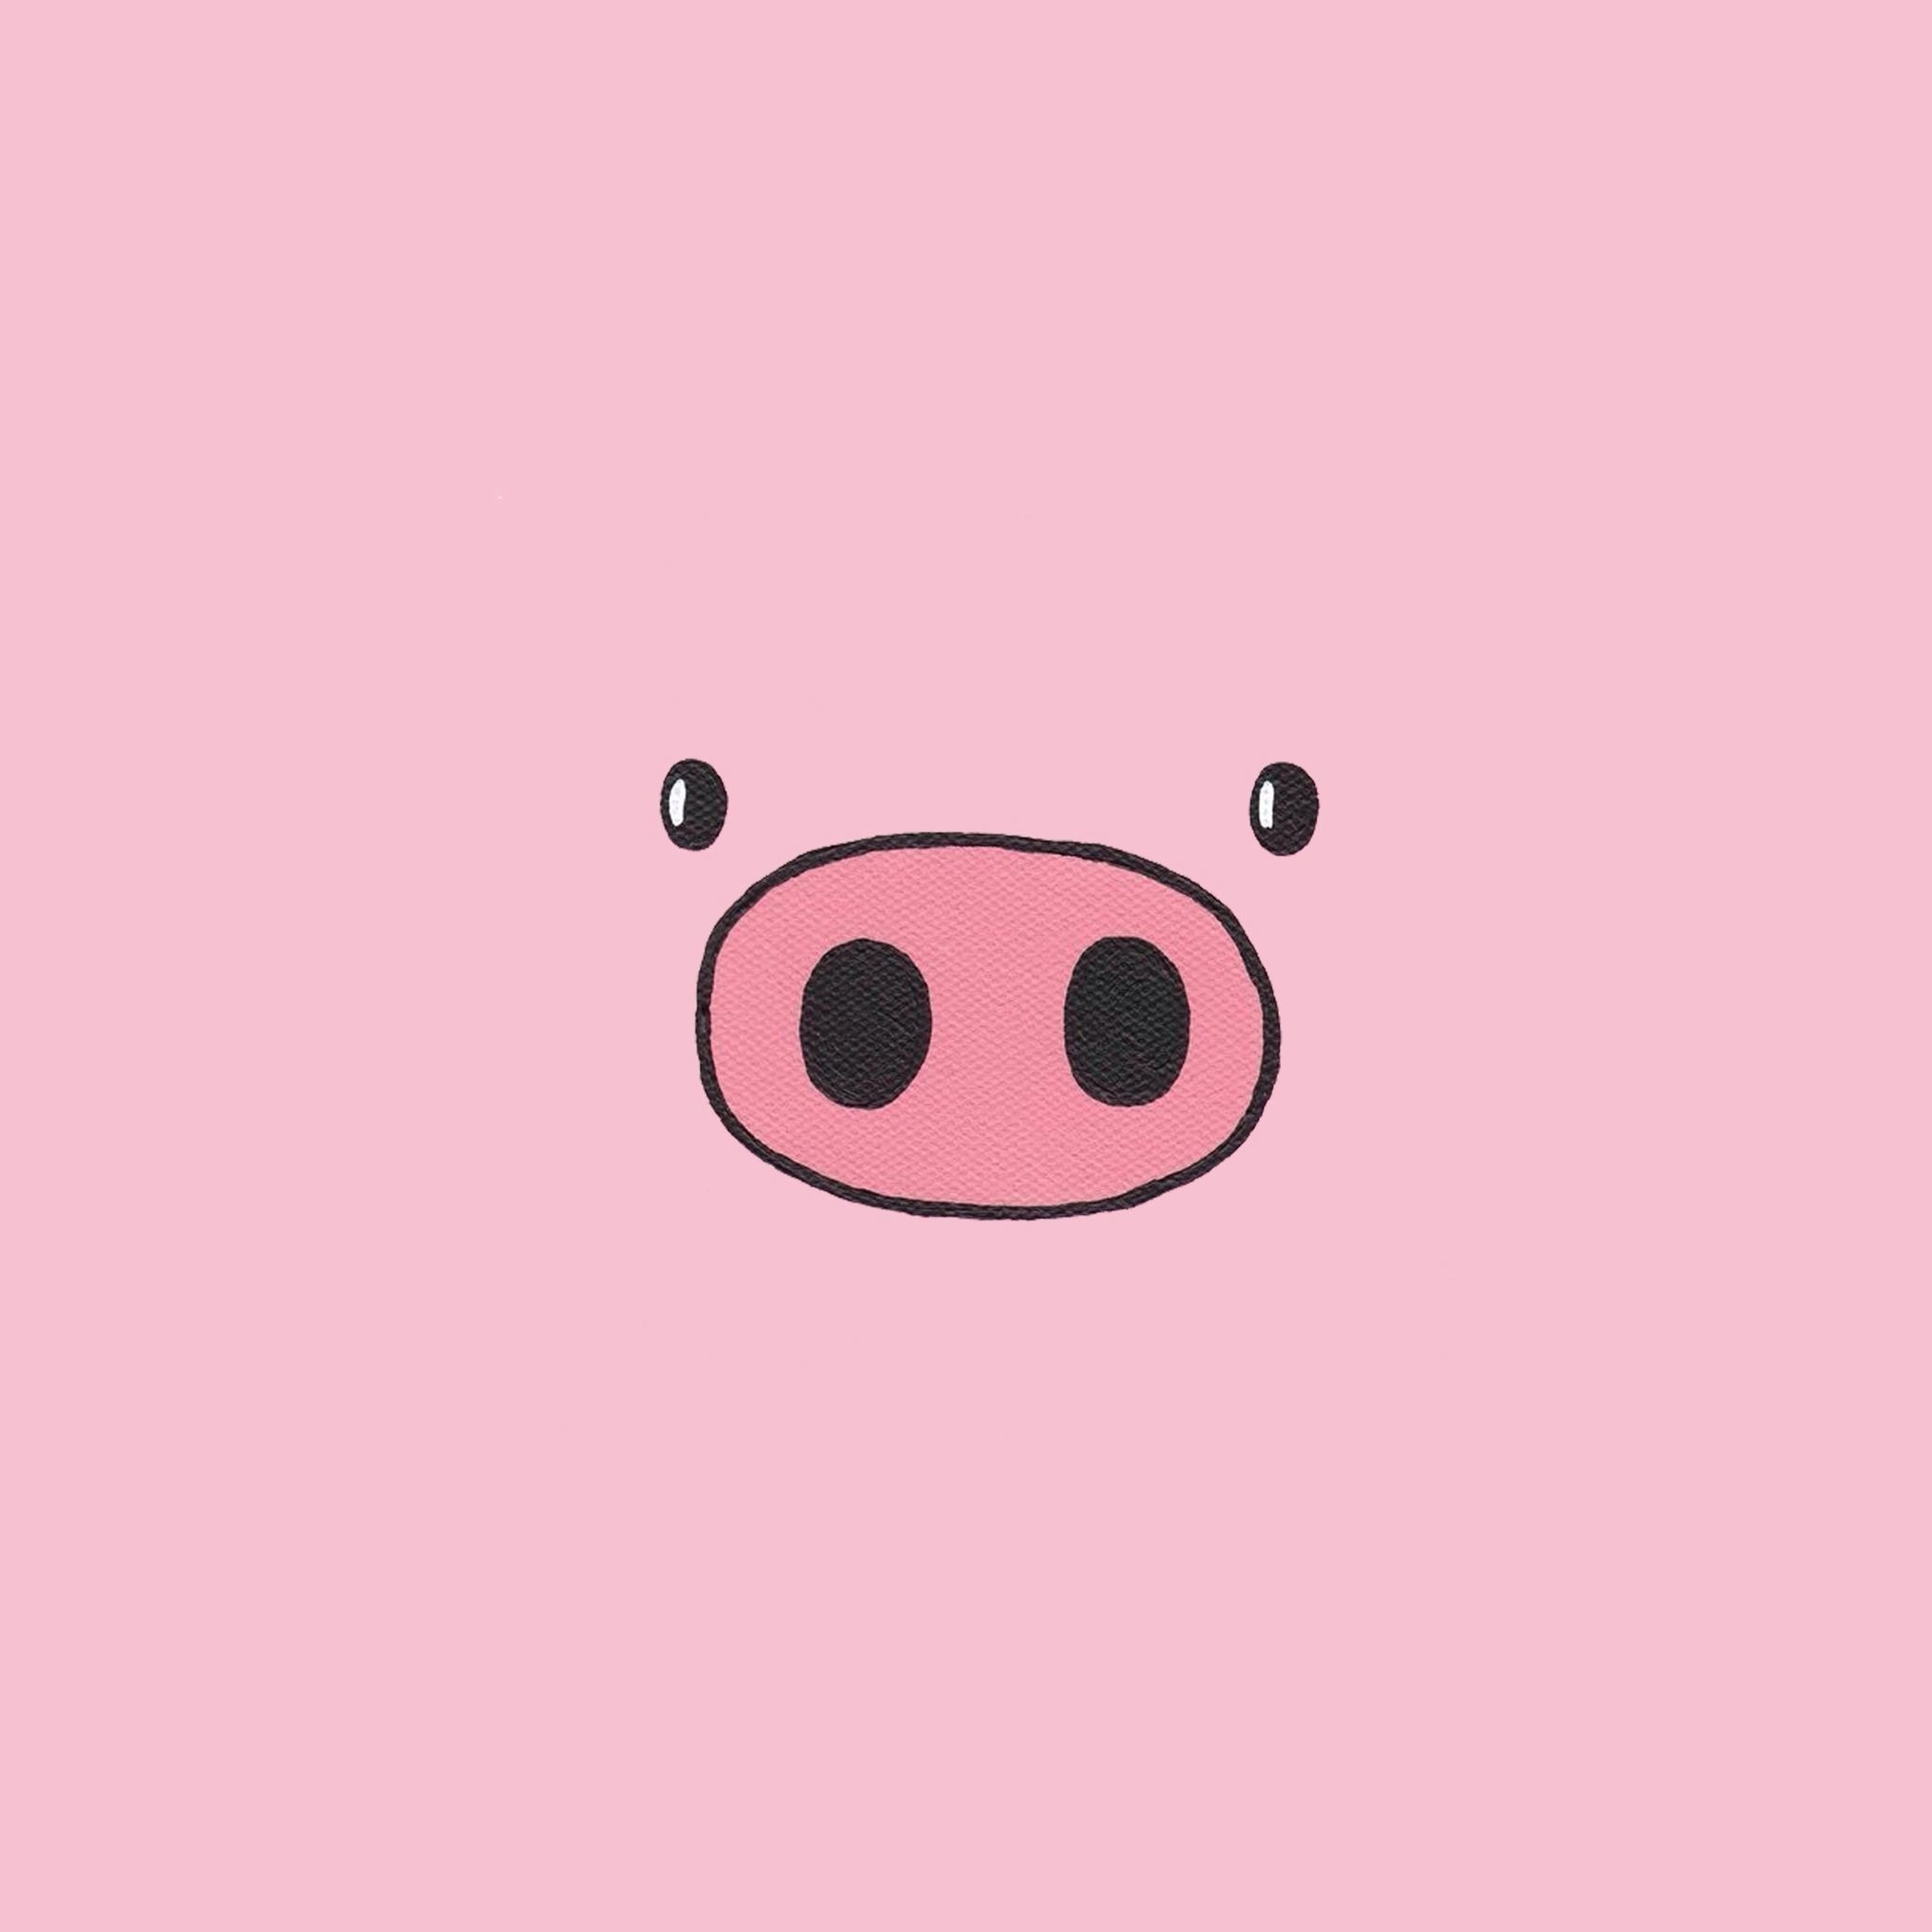 Pig iPhone wallpapers, Stylish piggy cuteness, Oink-tastic backgrounds, Playful snouts, 2050x2050 HD Handy